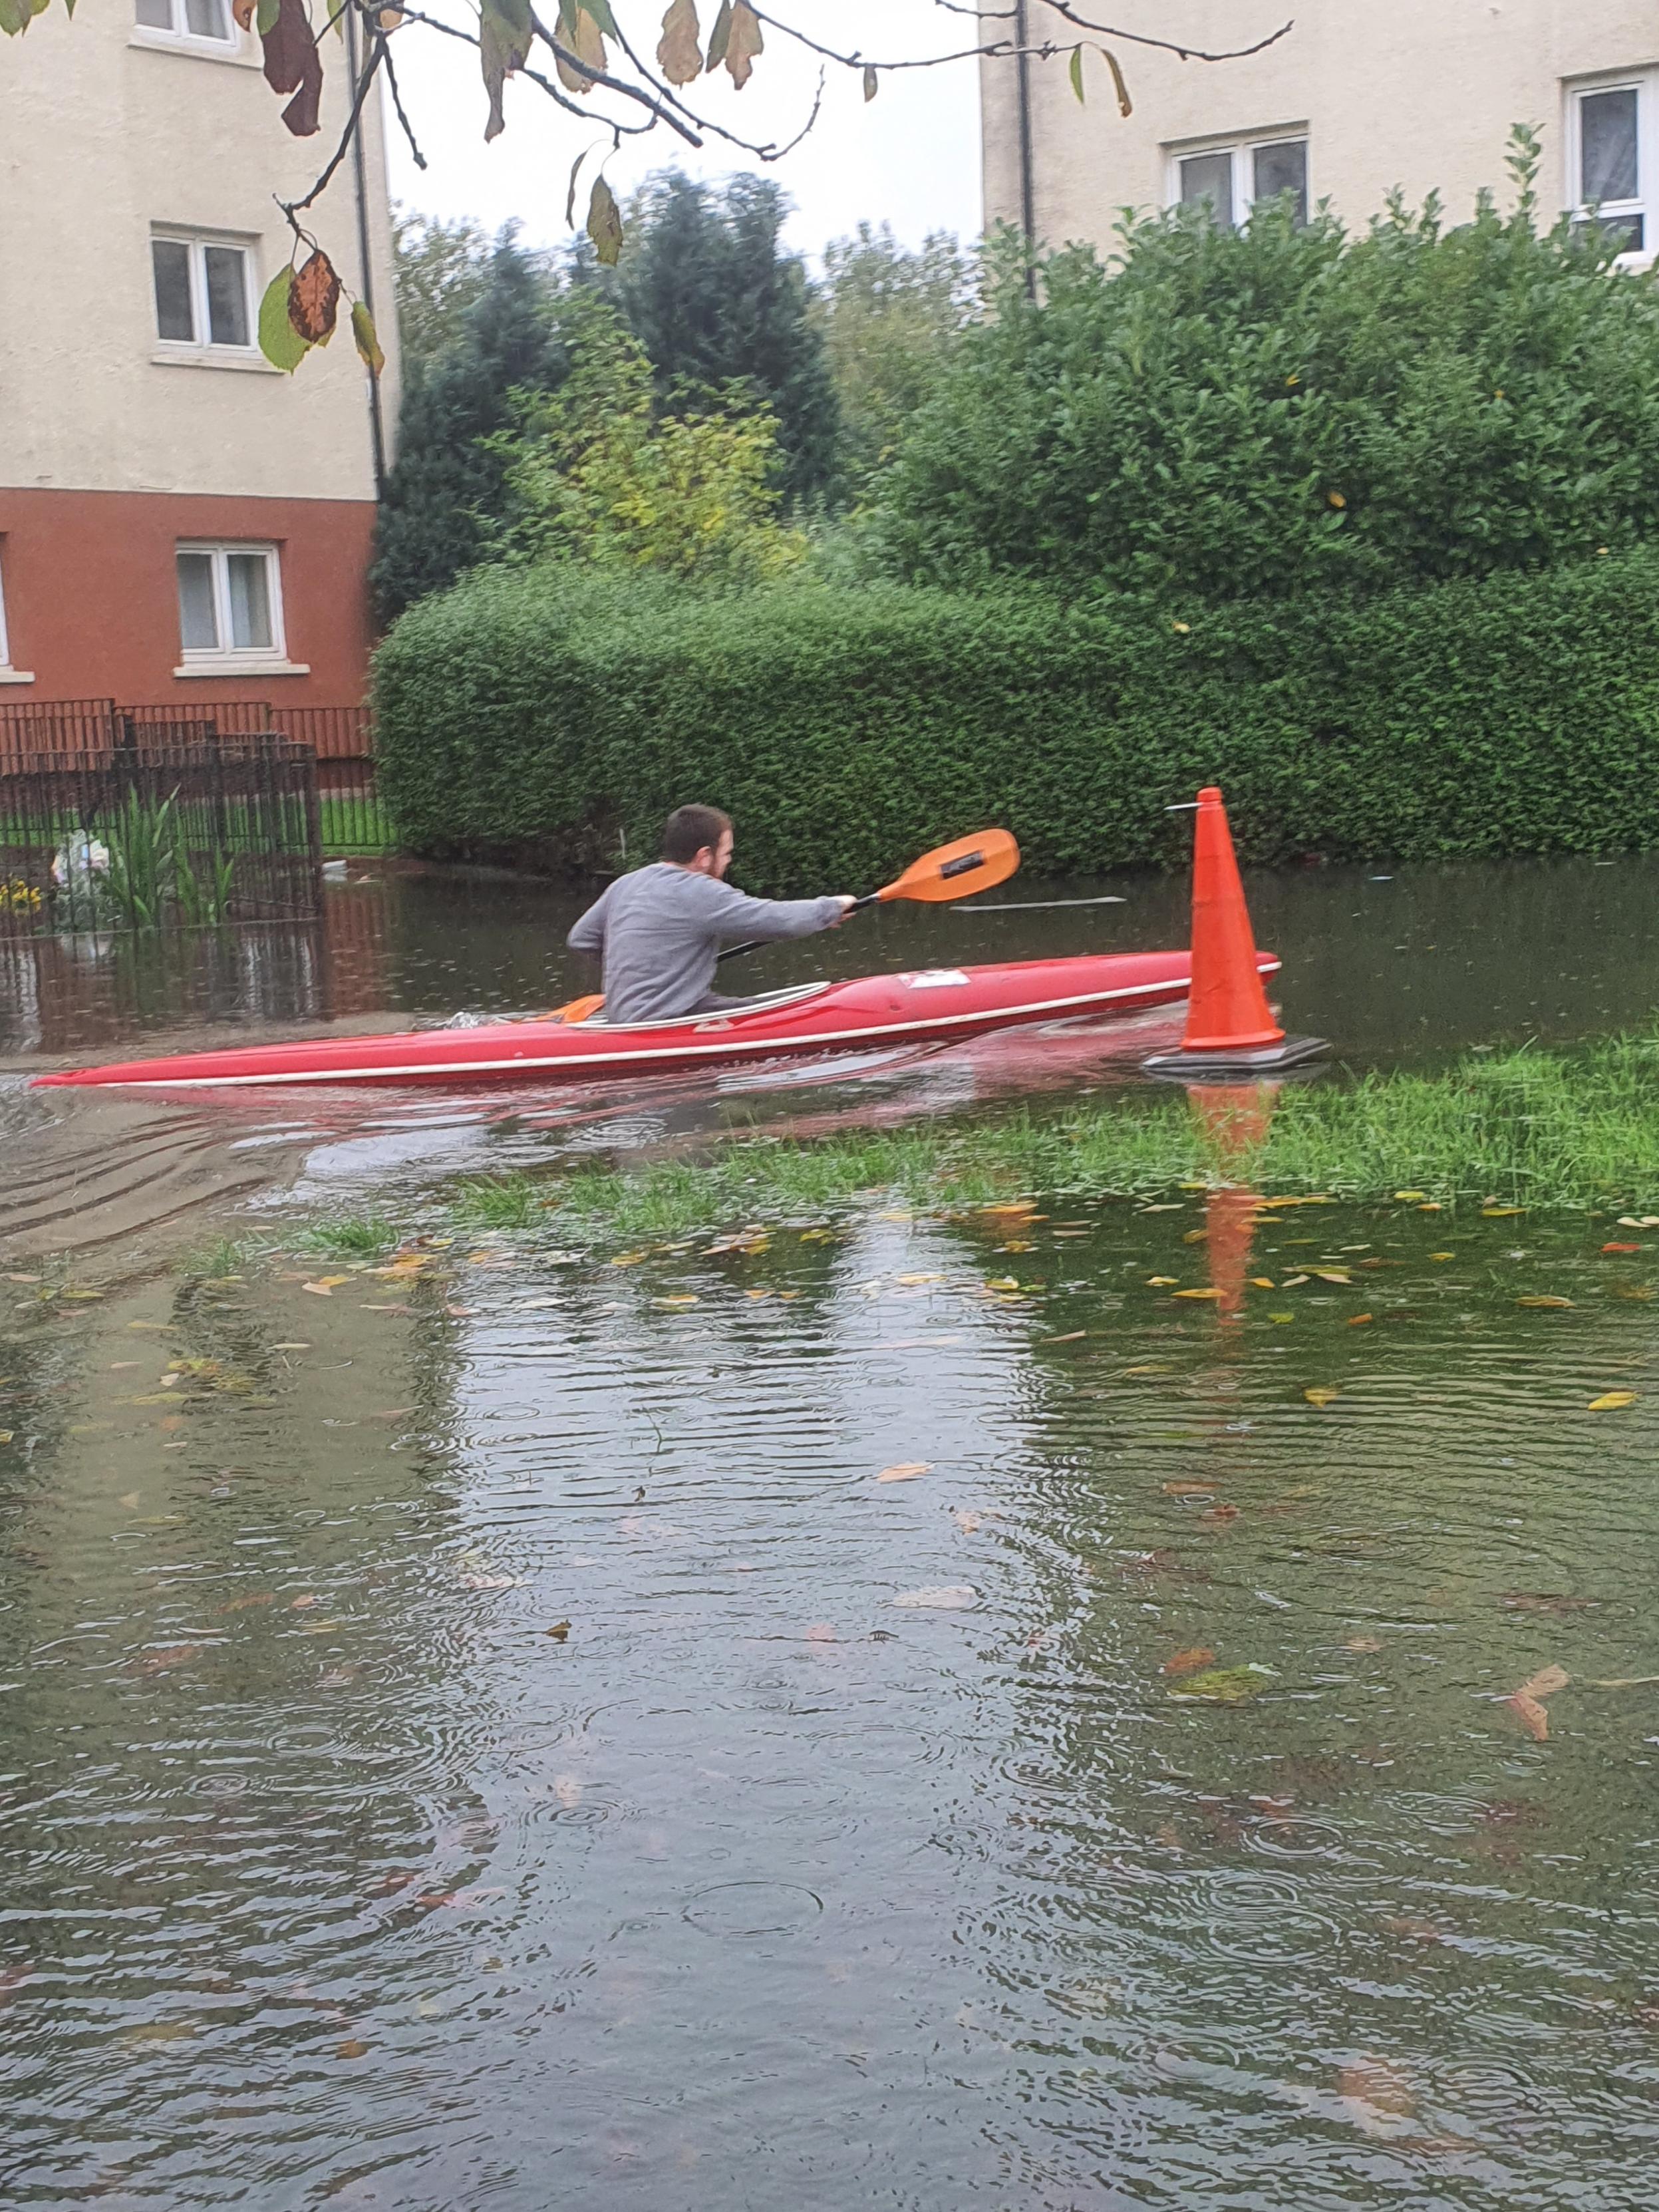 Man kayaking on a residential road that is flooded